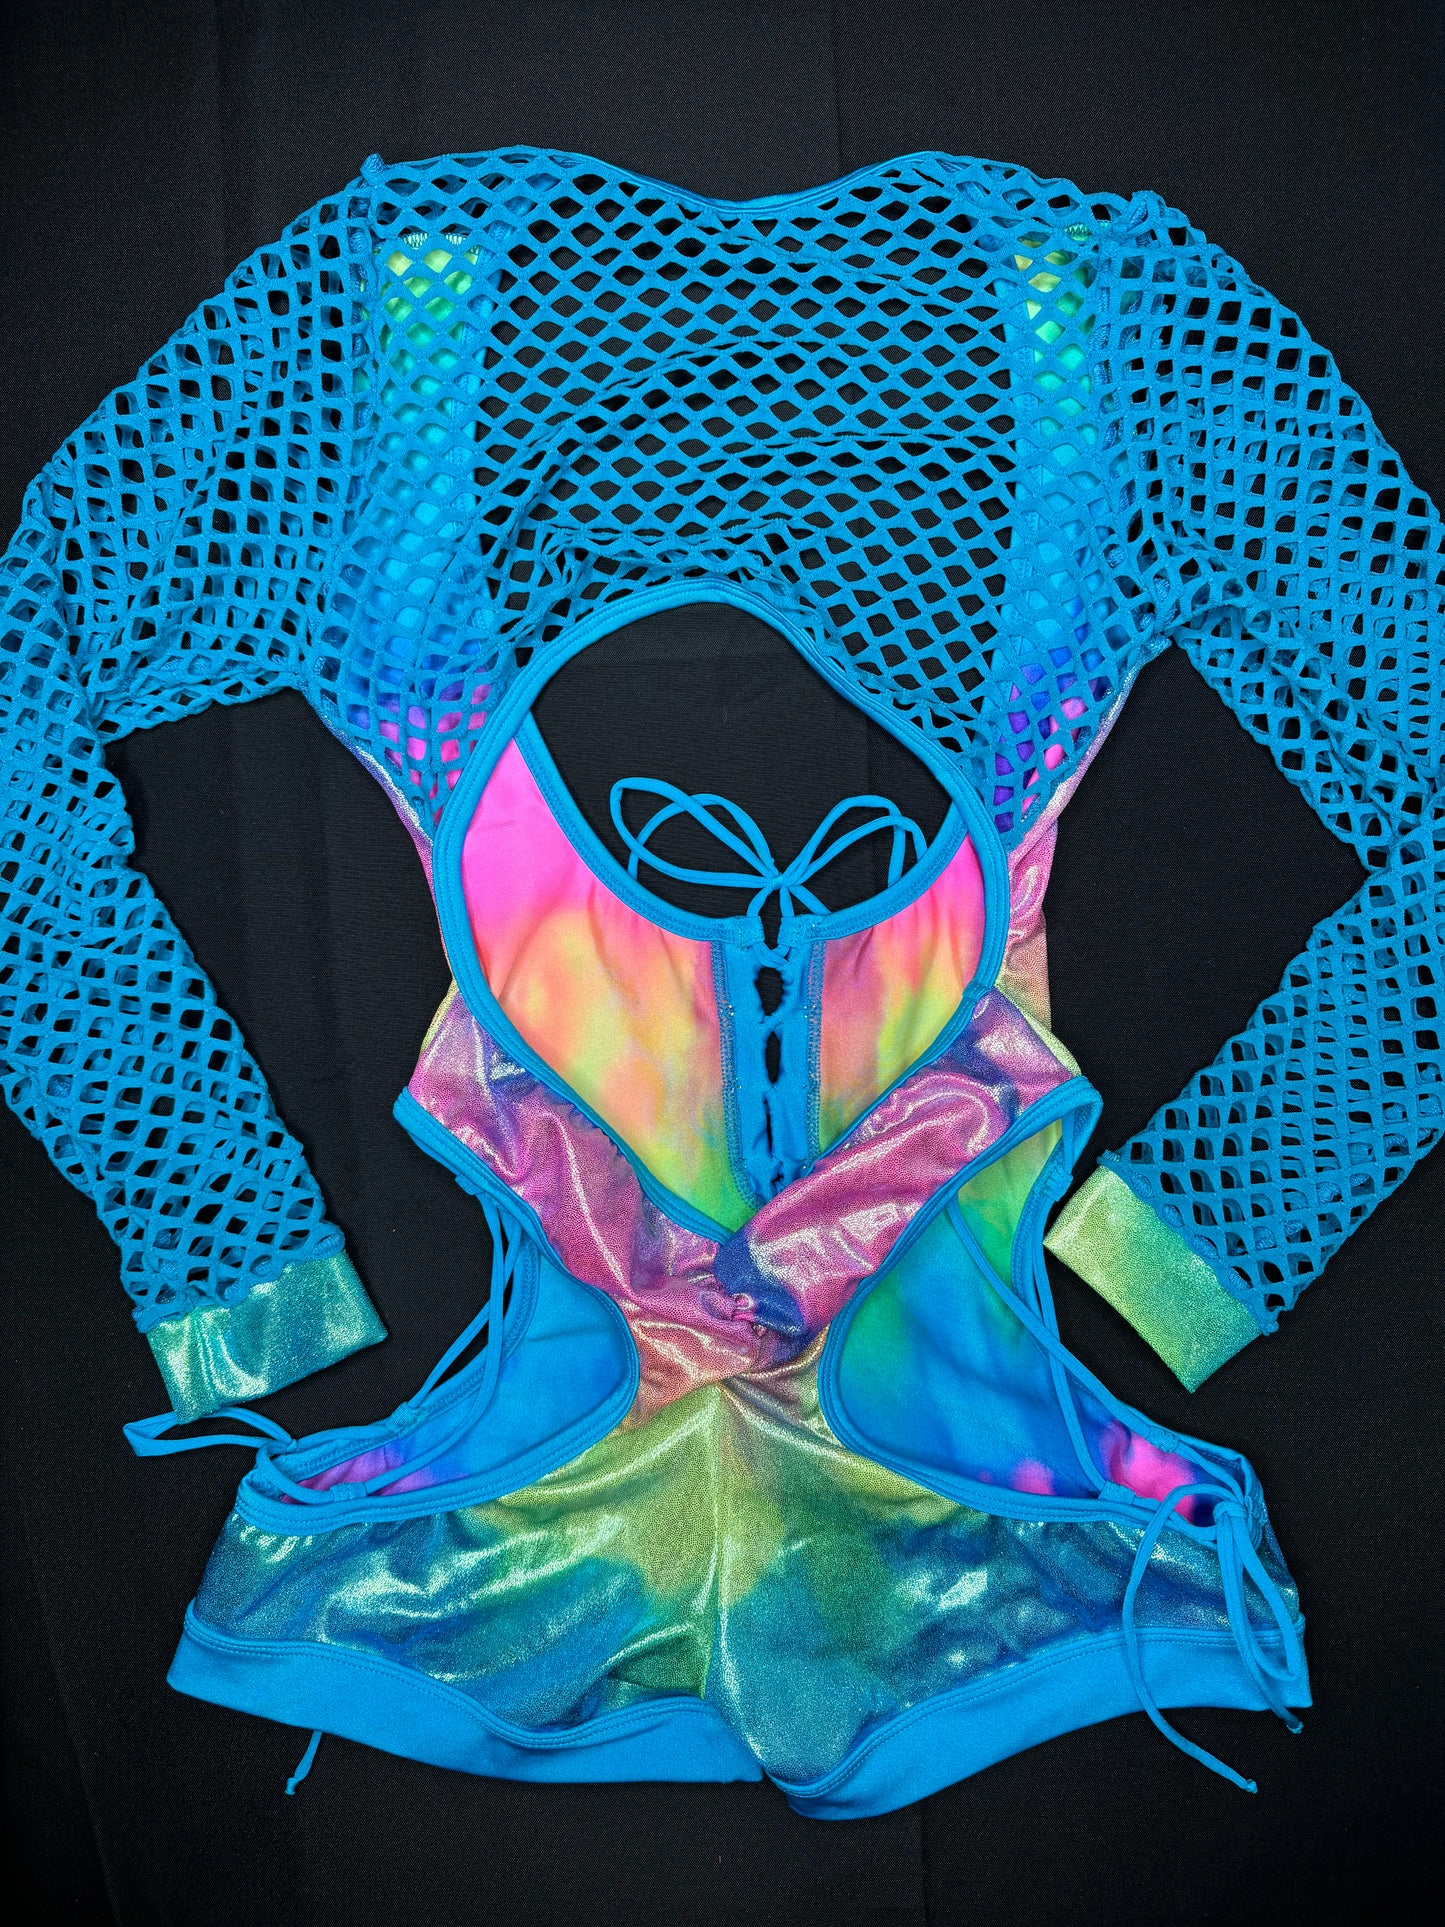 Rainbow/Turquoise Fishnet One-Piece Romper Lingerie Outfit